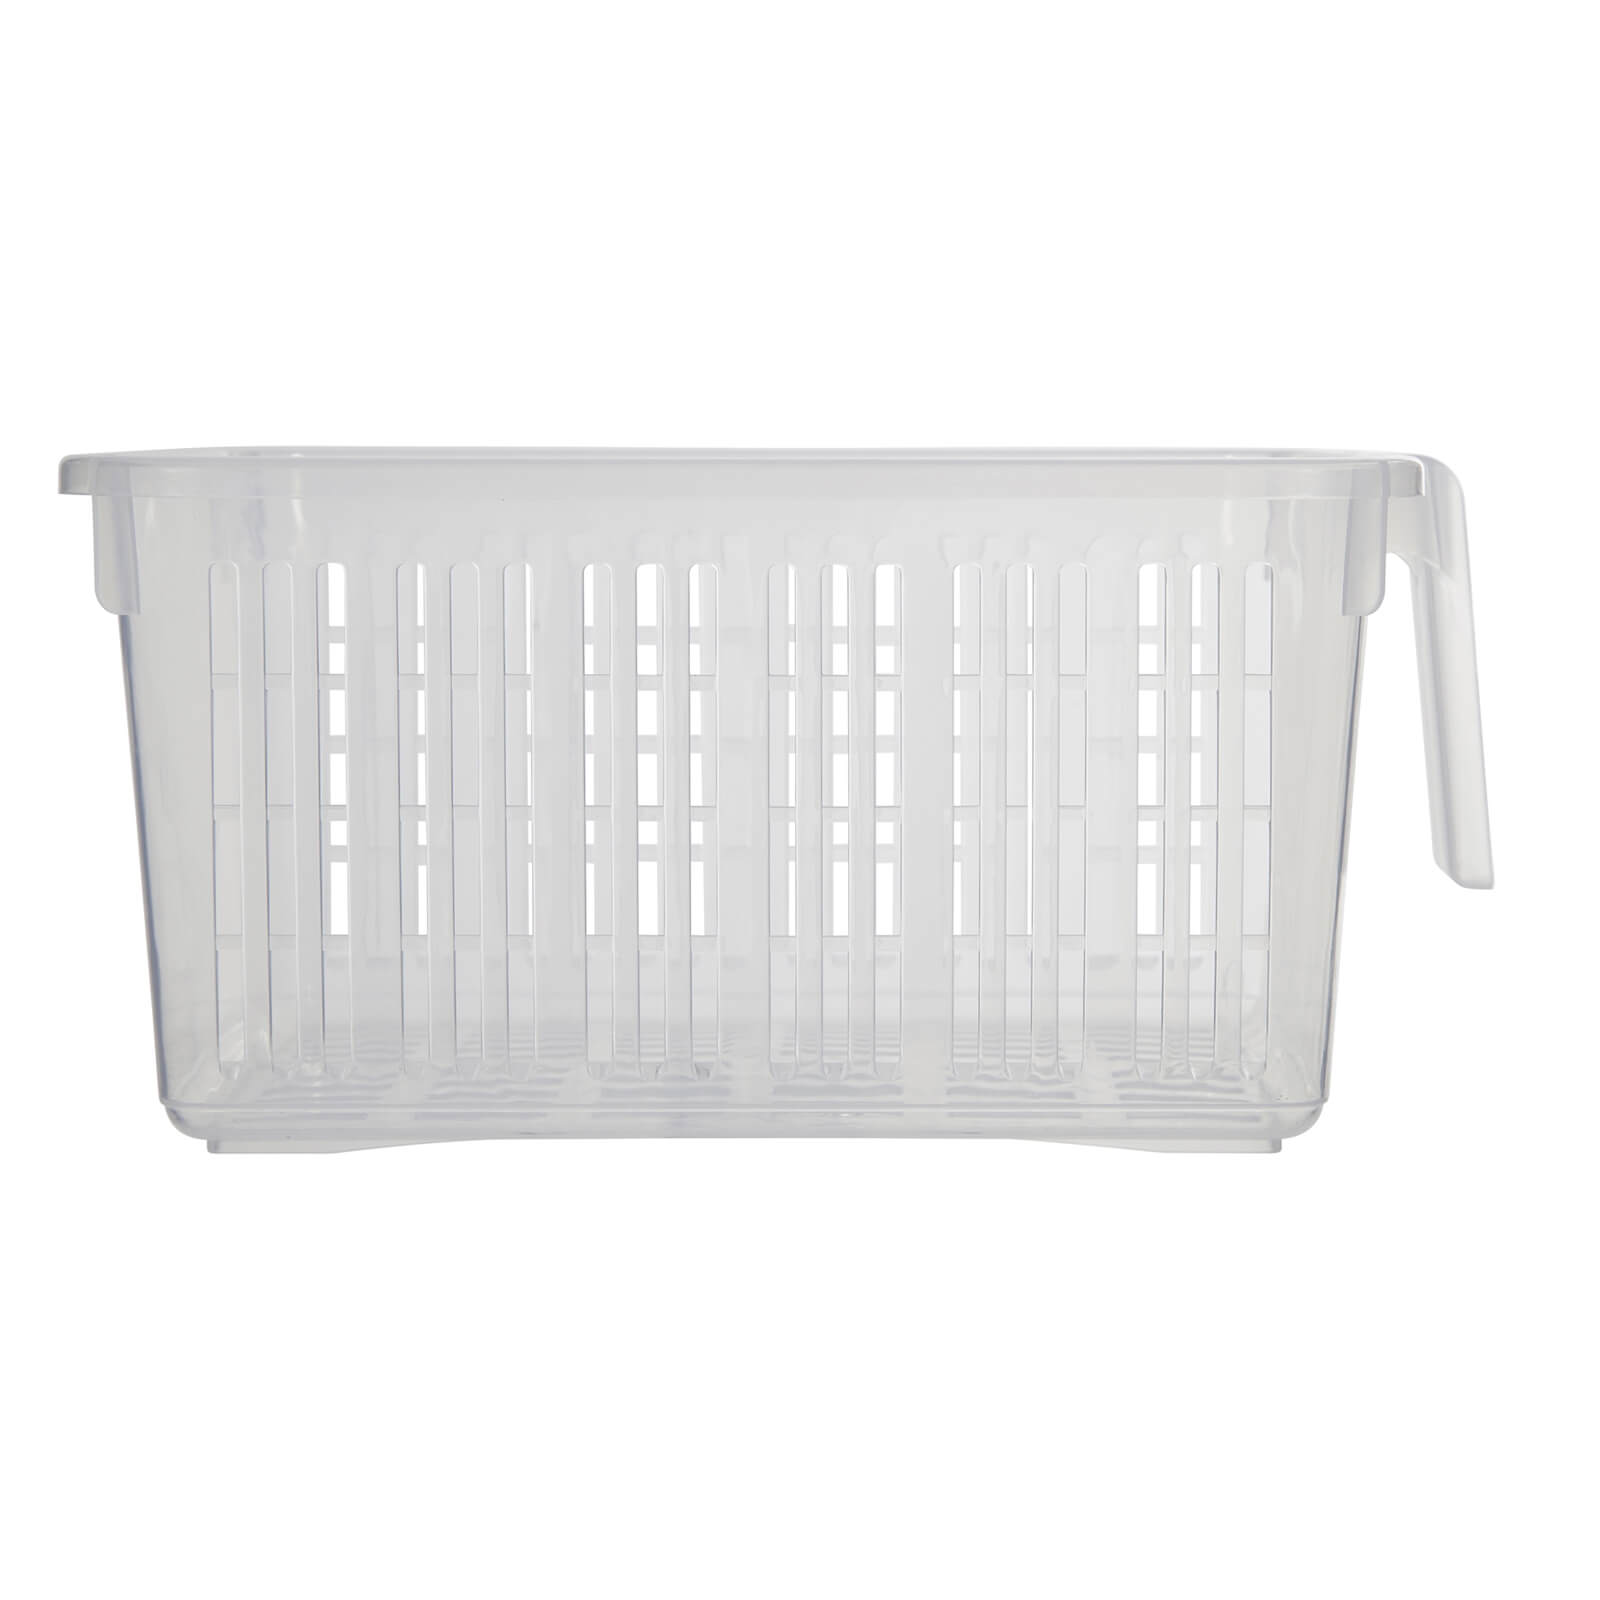 Caddy Baskets with Handle - Large